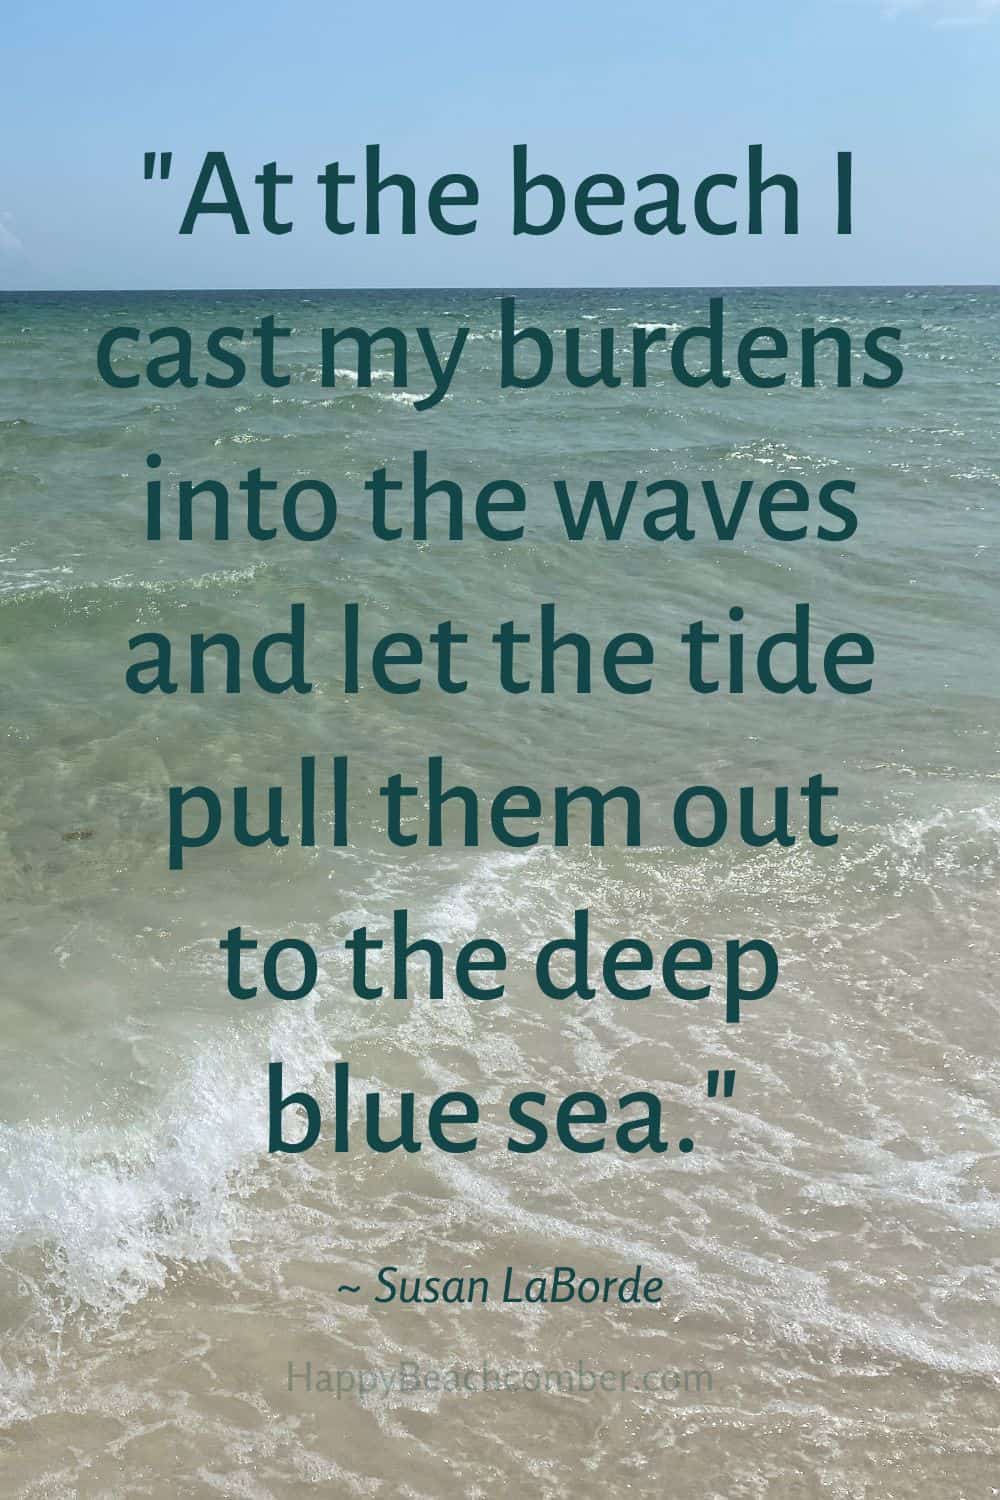 At the beach I cast my burdens into the waves and...